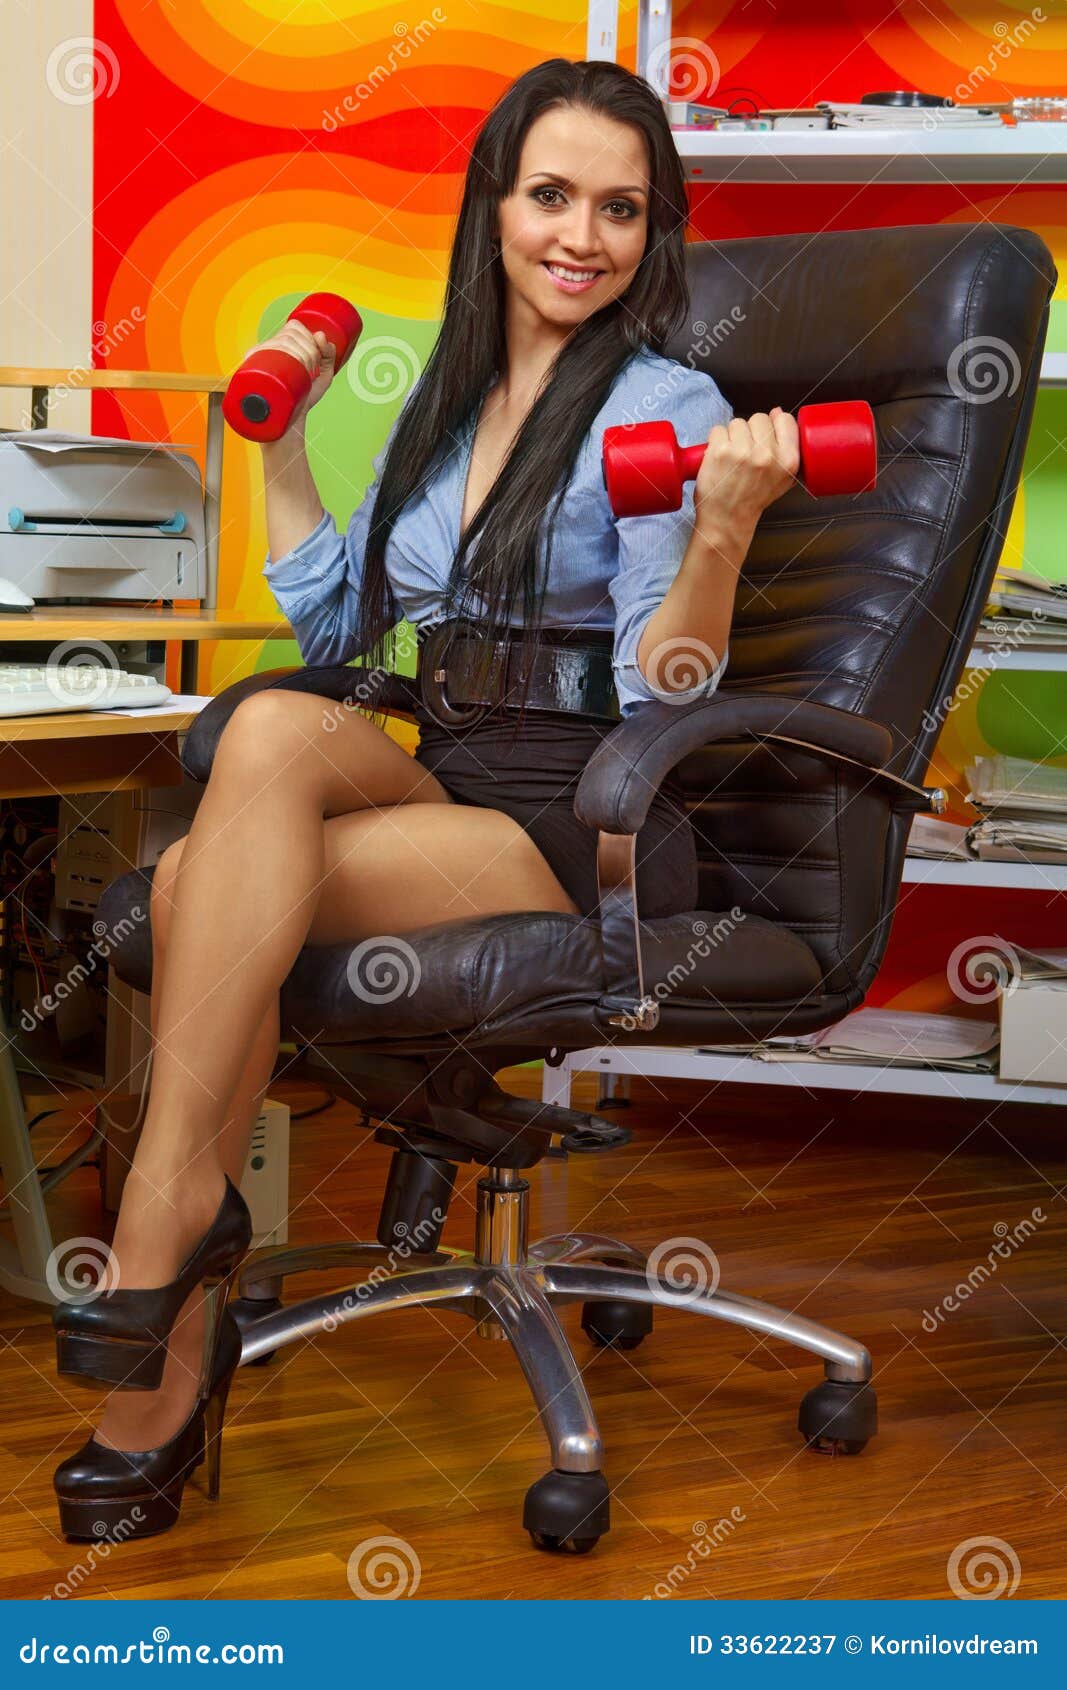 businesswoman stretching with dumbbells